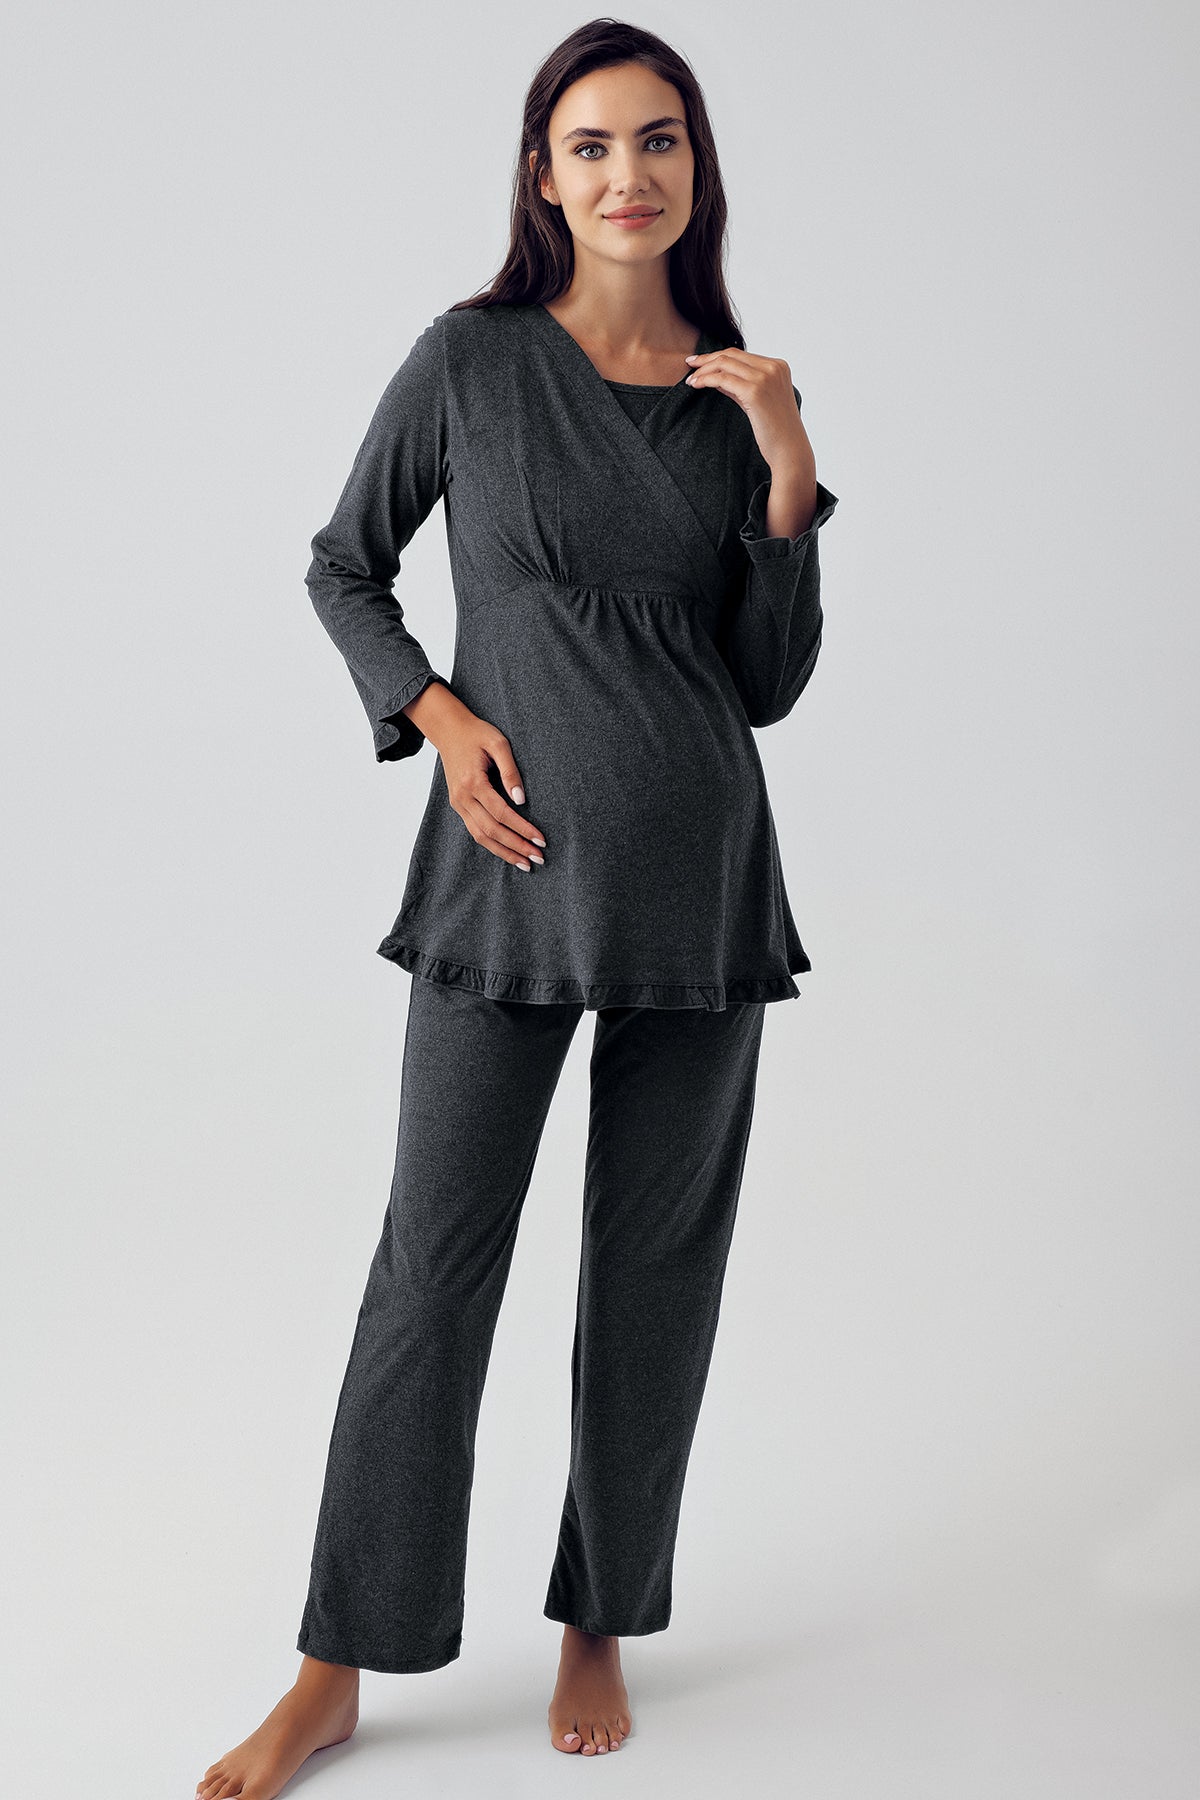 Shopymommy 15301 Double Breasted 3-Pieces Maternity & Nursing Pajamas With Knitwear Robe Anthracite